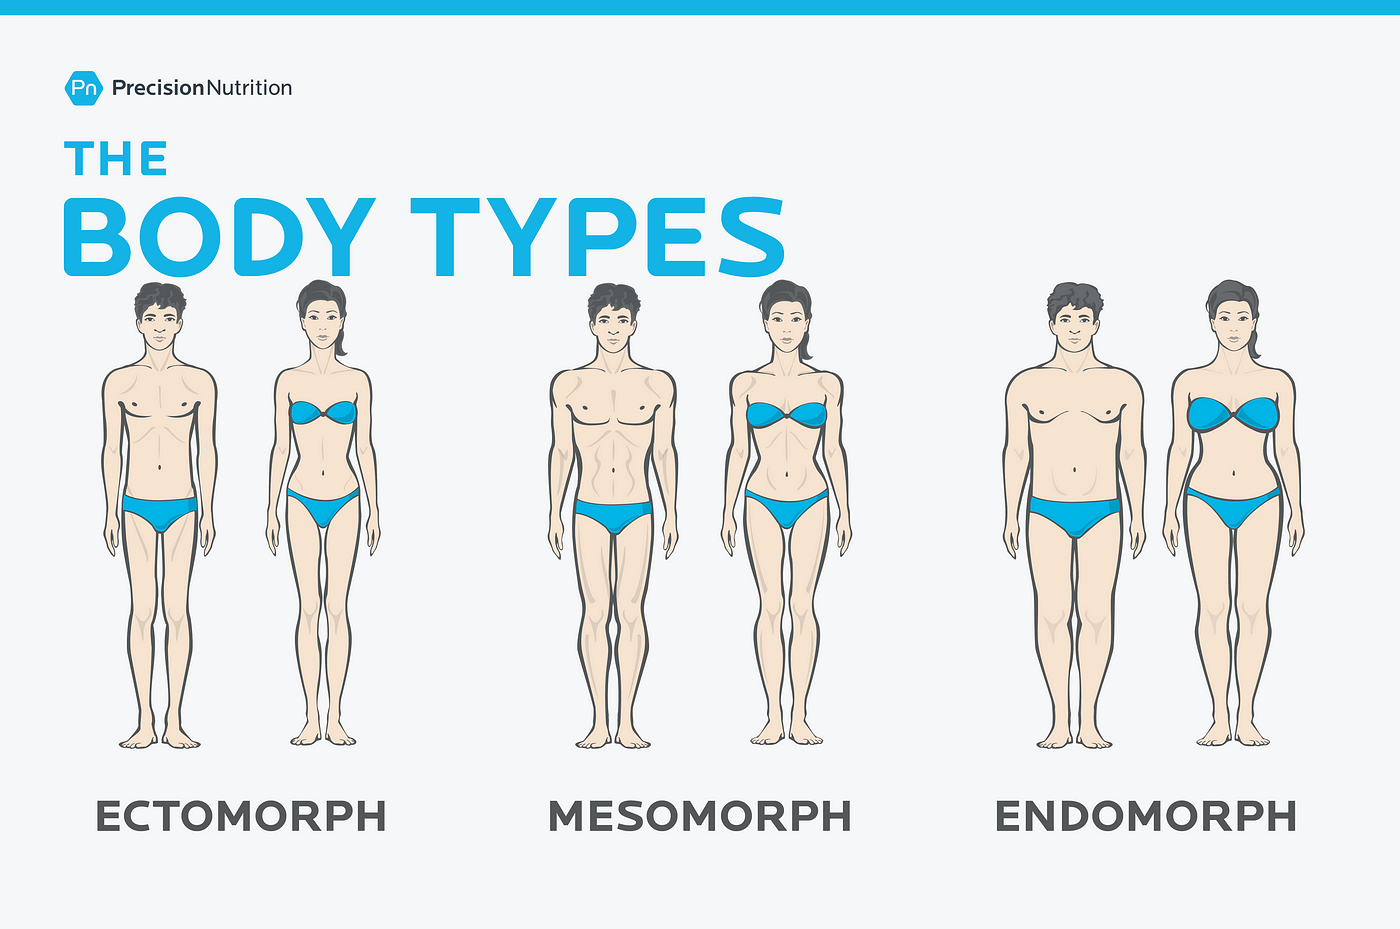 Gympanzie - HOW TO: FIND YOUR BODY TYPE - Determining which body type you  fit into could have a huge impact on how your body responds to nutrition  and exercise. 🔥 